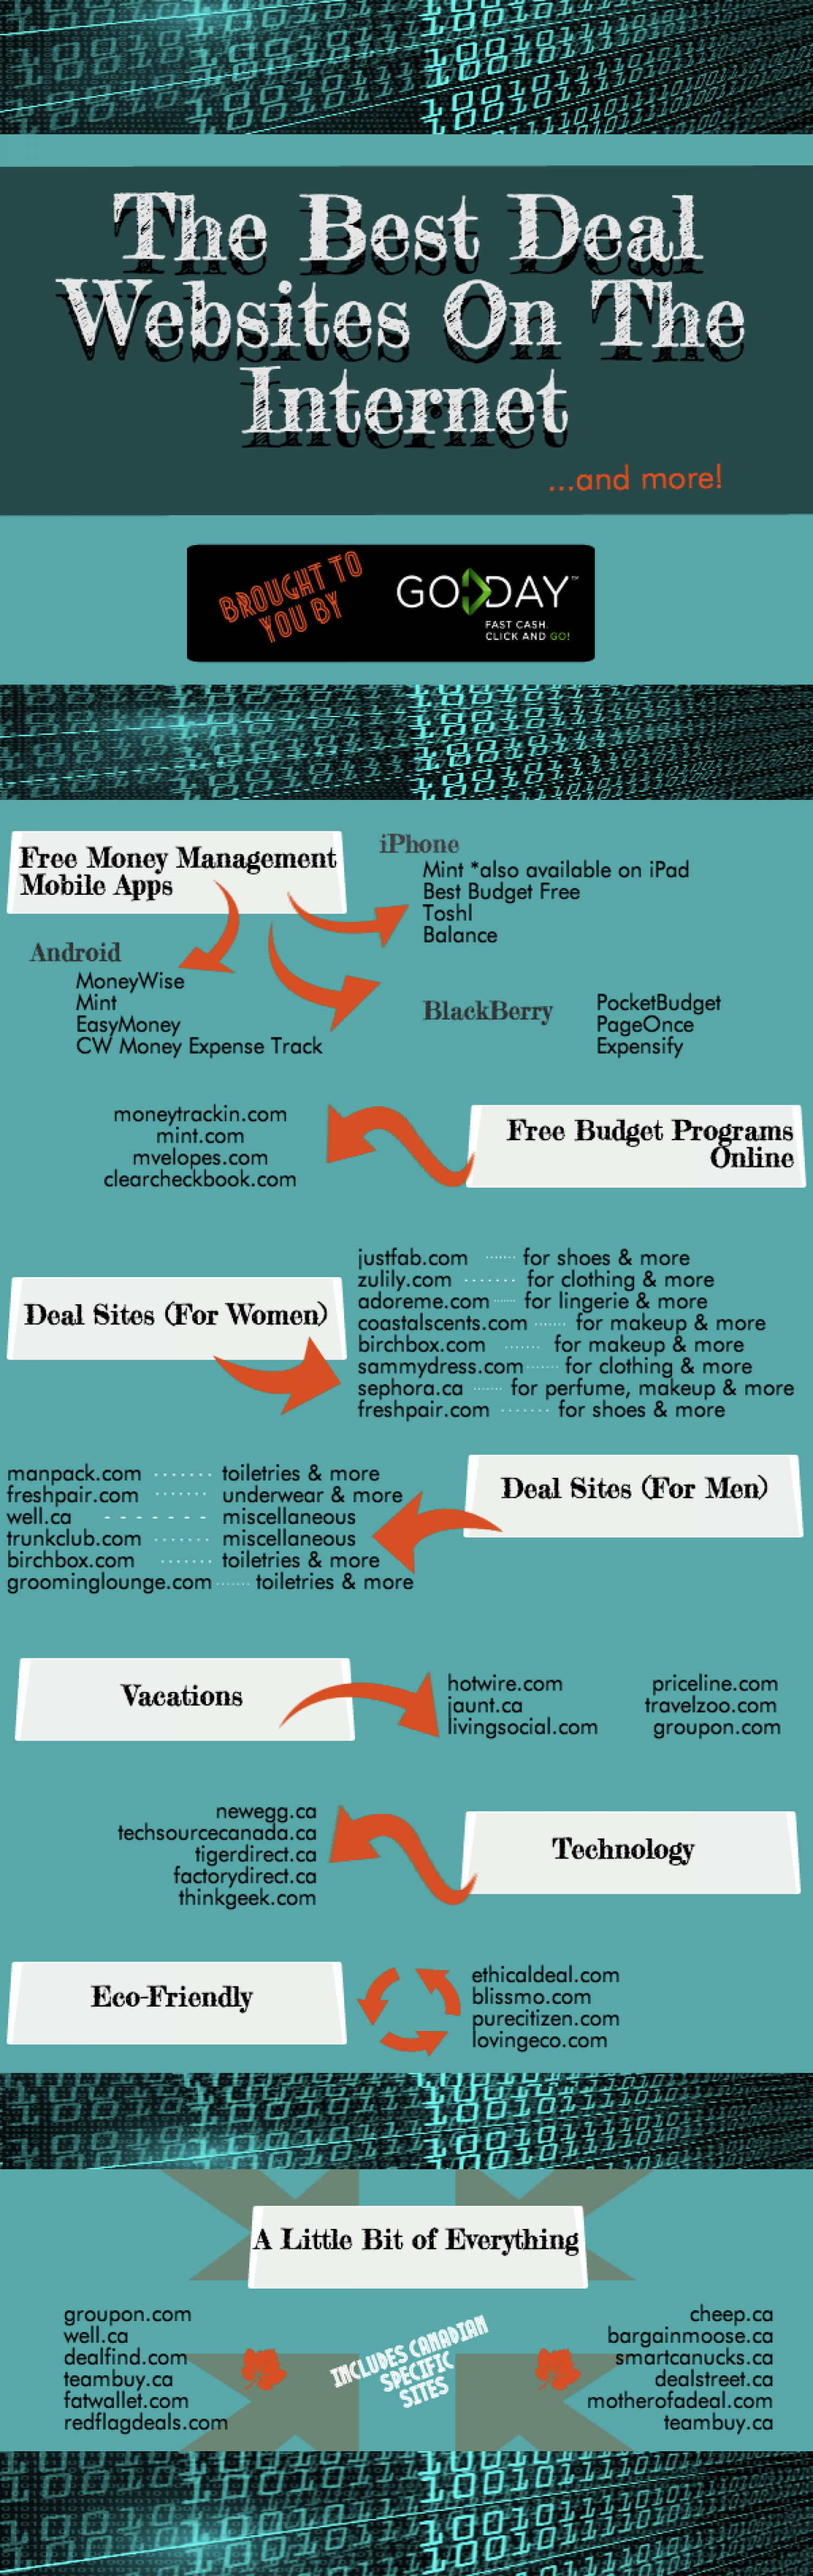 The Best Deal Websites On The Internet Infographic